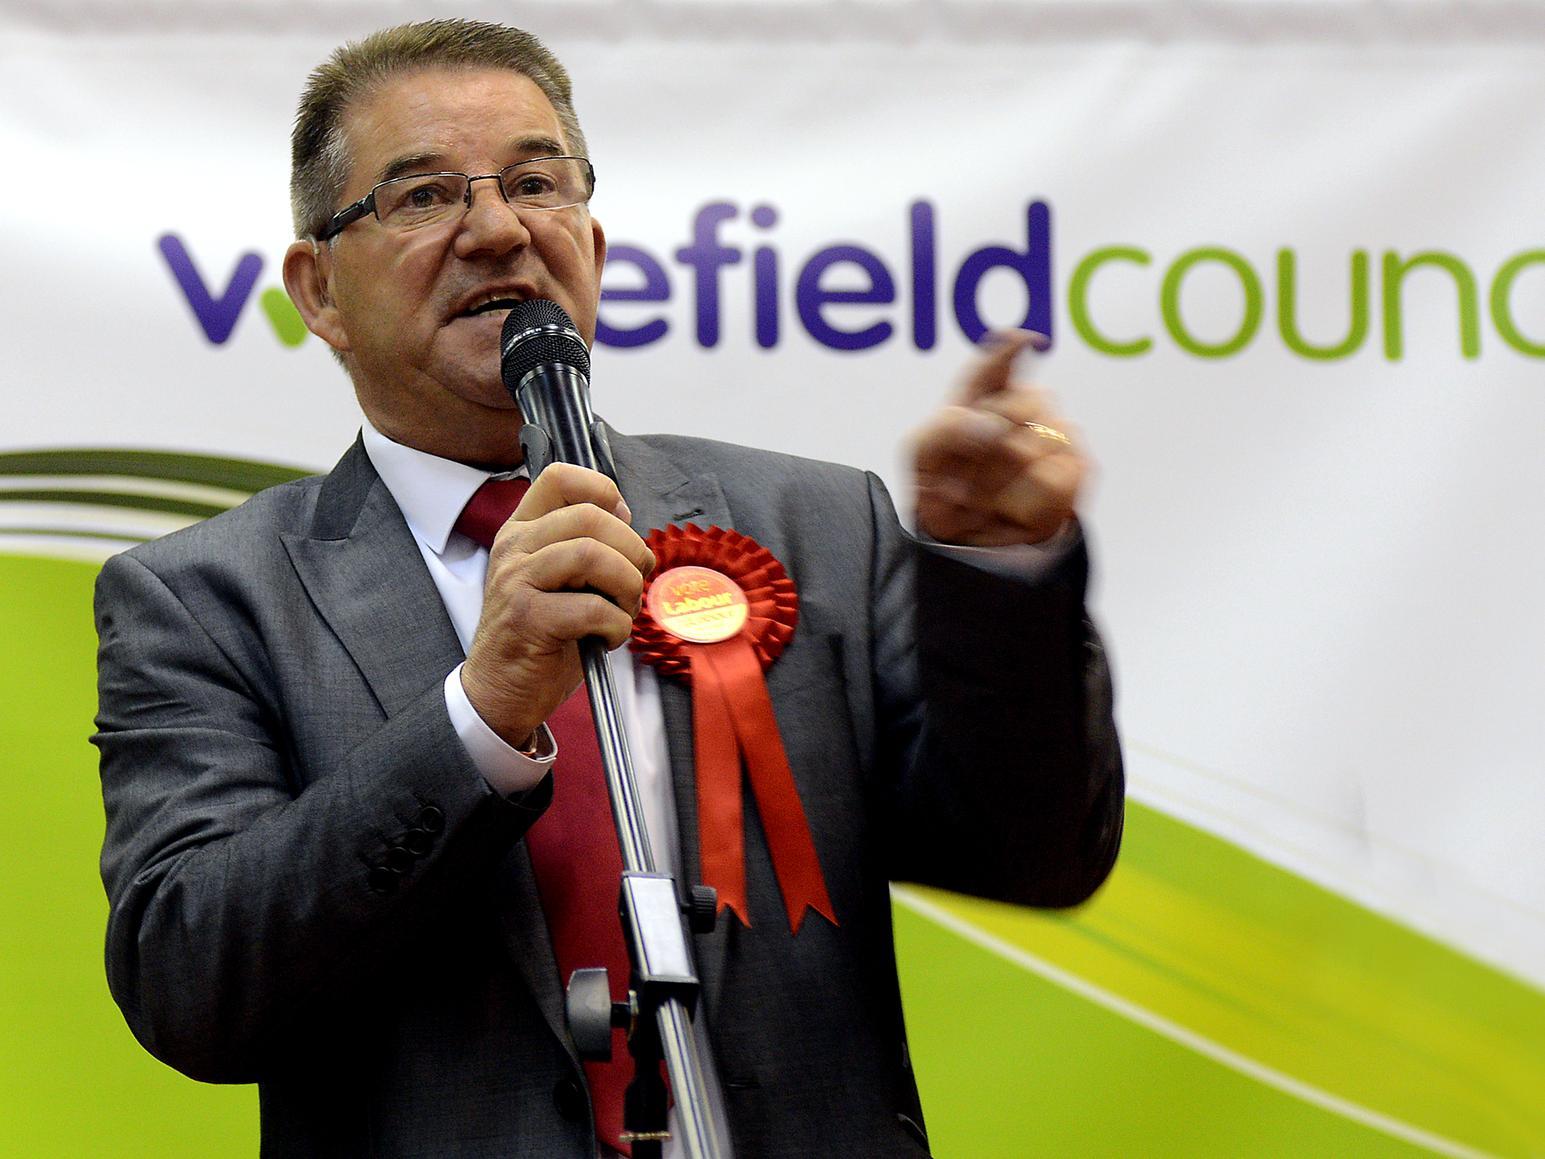 Coun Tulley represents South Elmsall and South Kirkby on Wakefield Council.